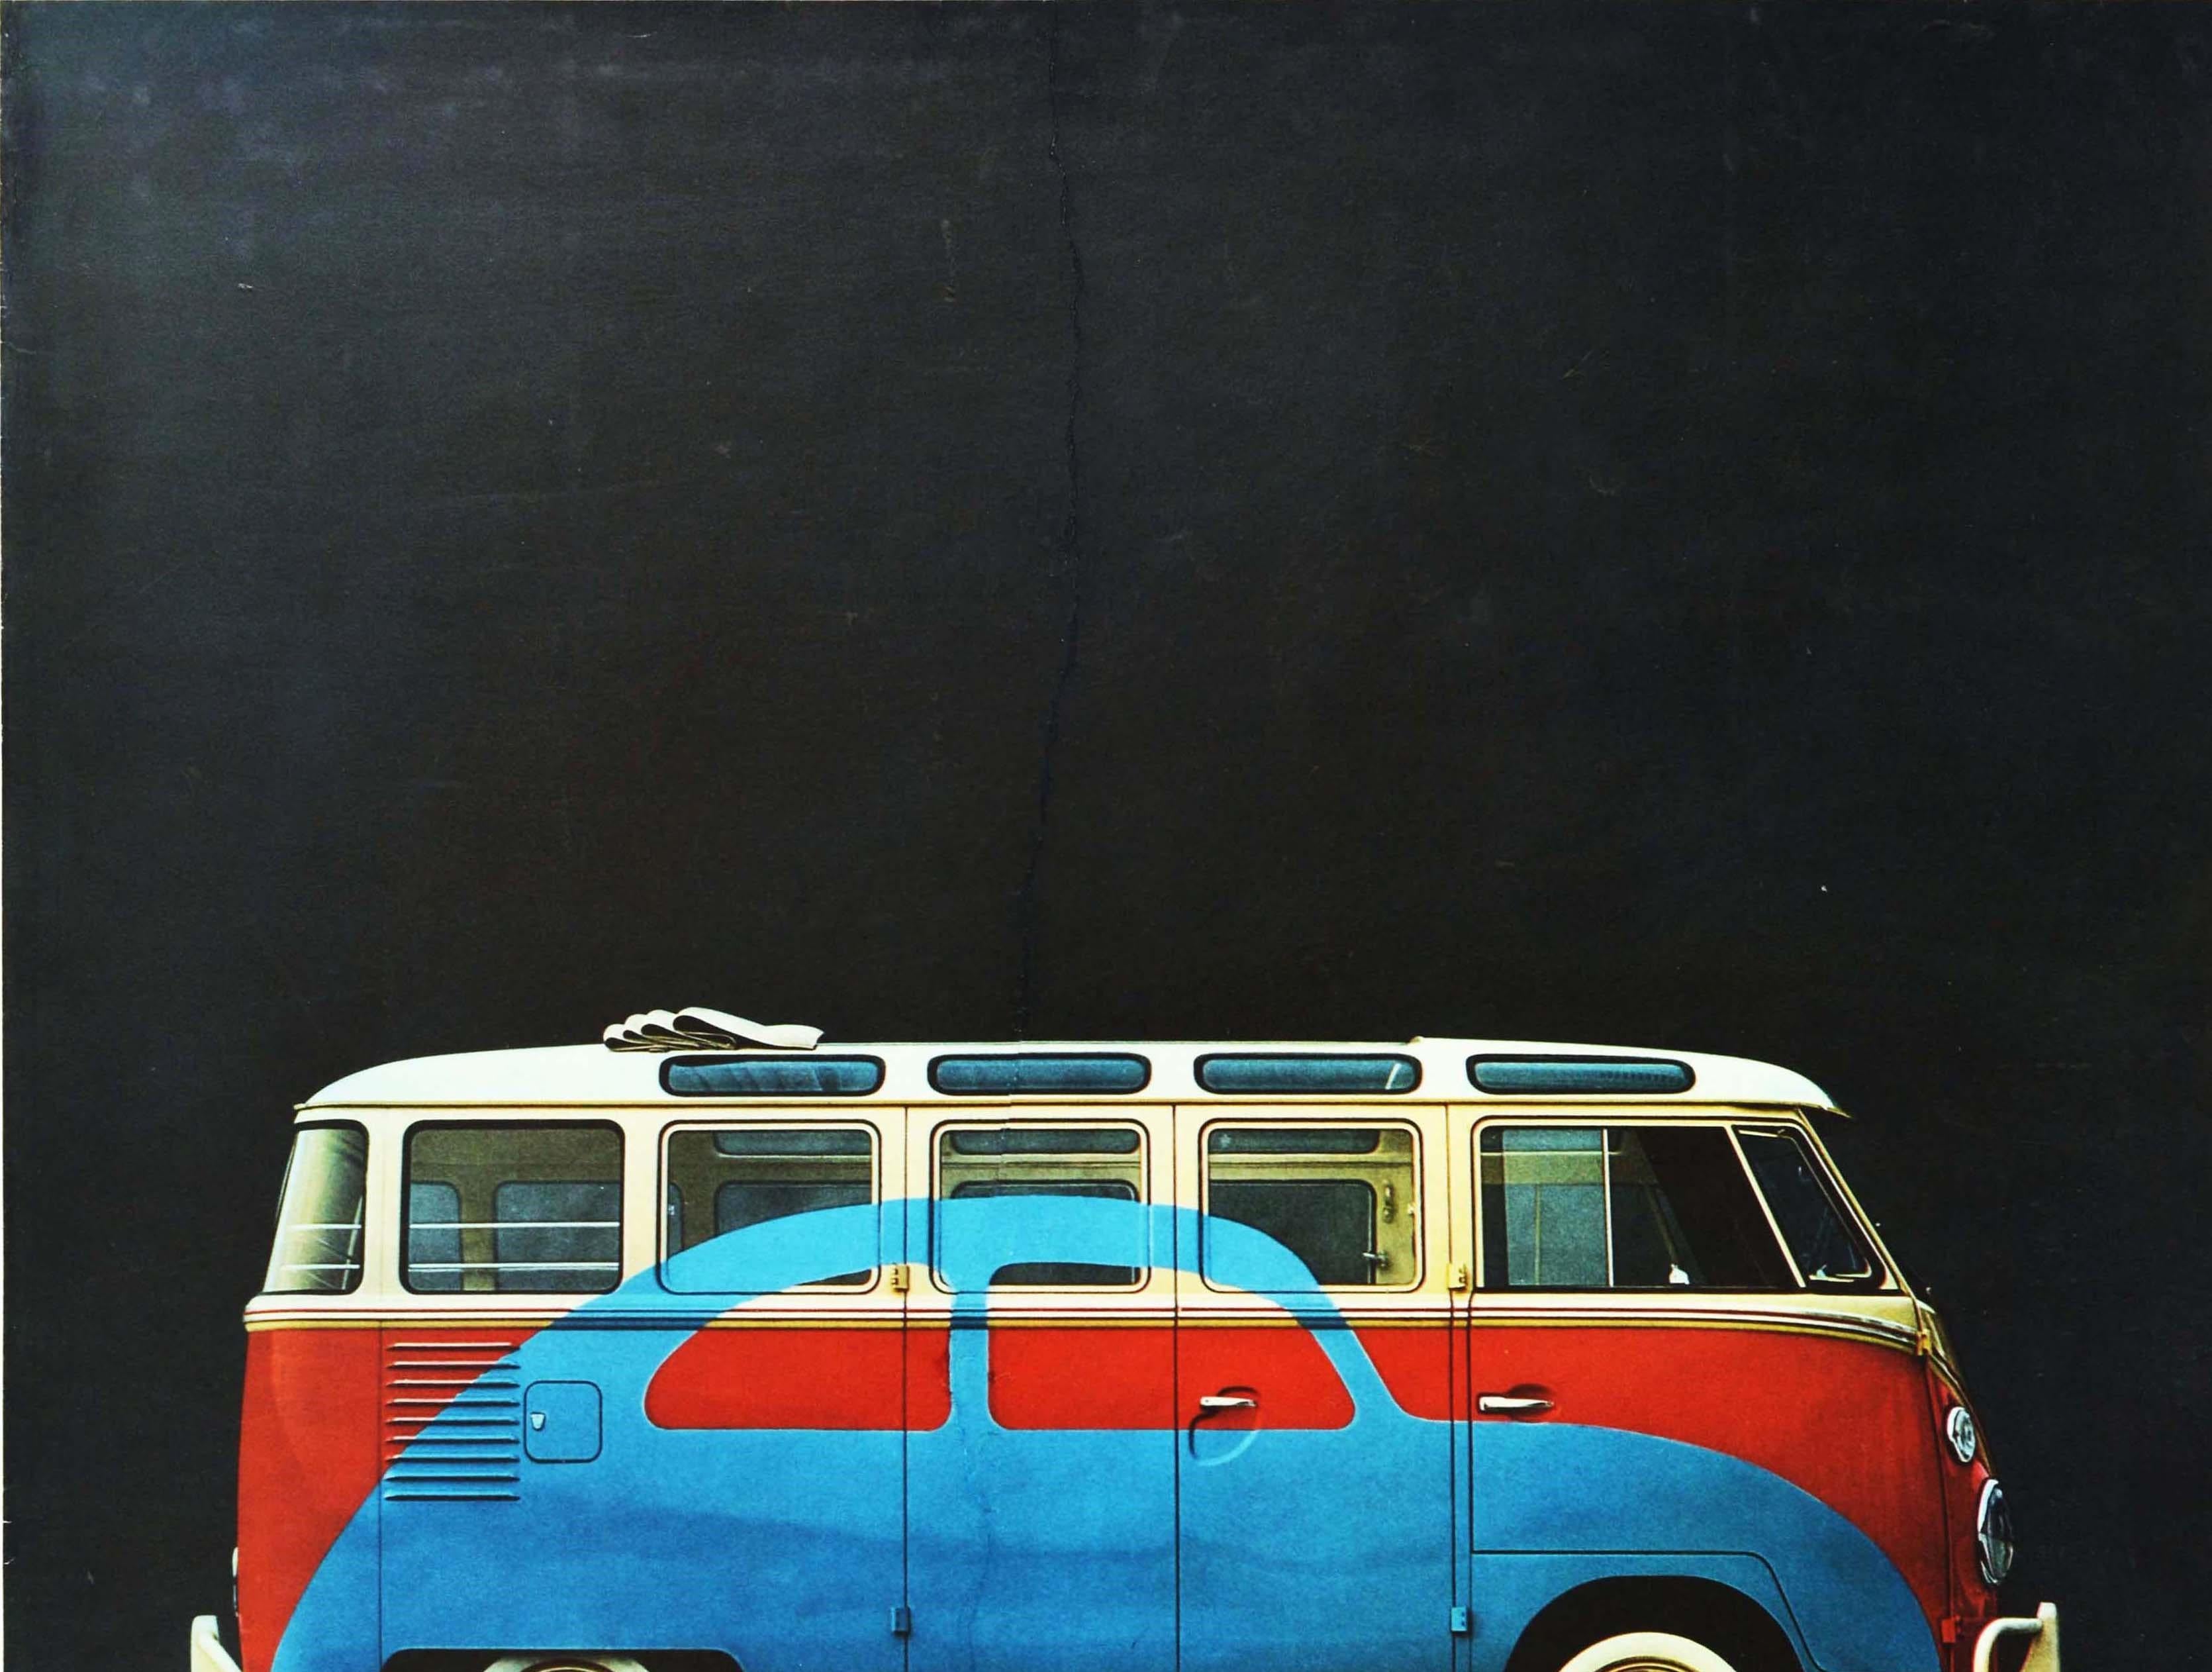 Original vintage camper van advertising poster for Volkswagen - That's about the size of it - featuring a great design showing an iconic VW Station Wagon in red and white with the shape of a VW Beetle car in blue on the side against a dark